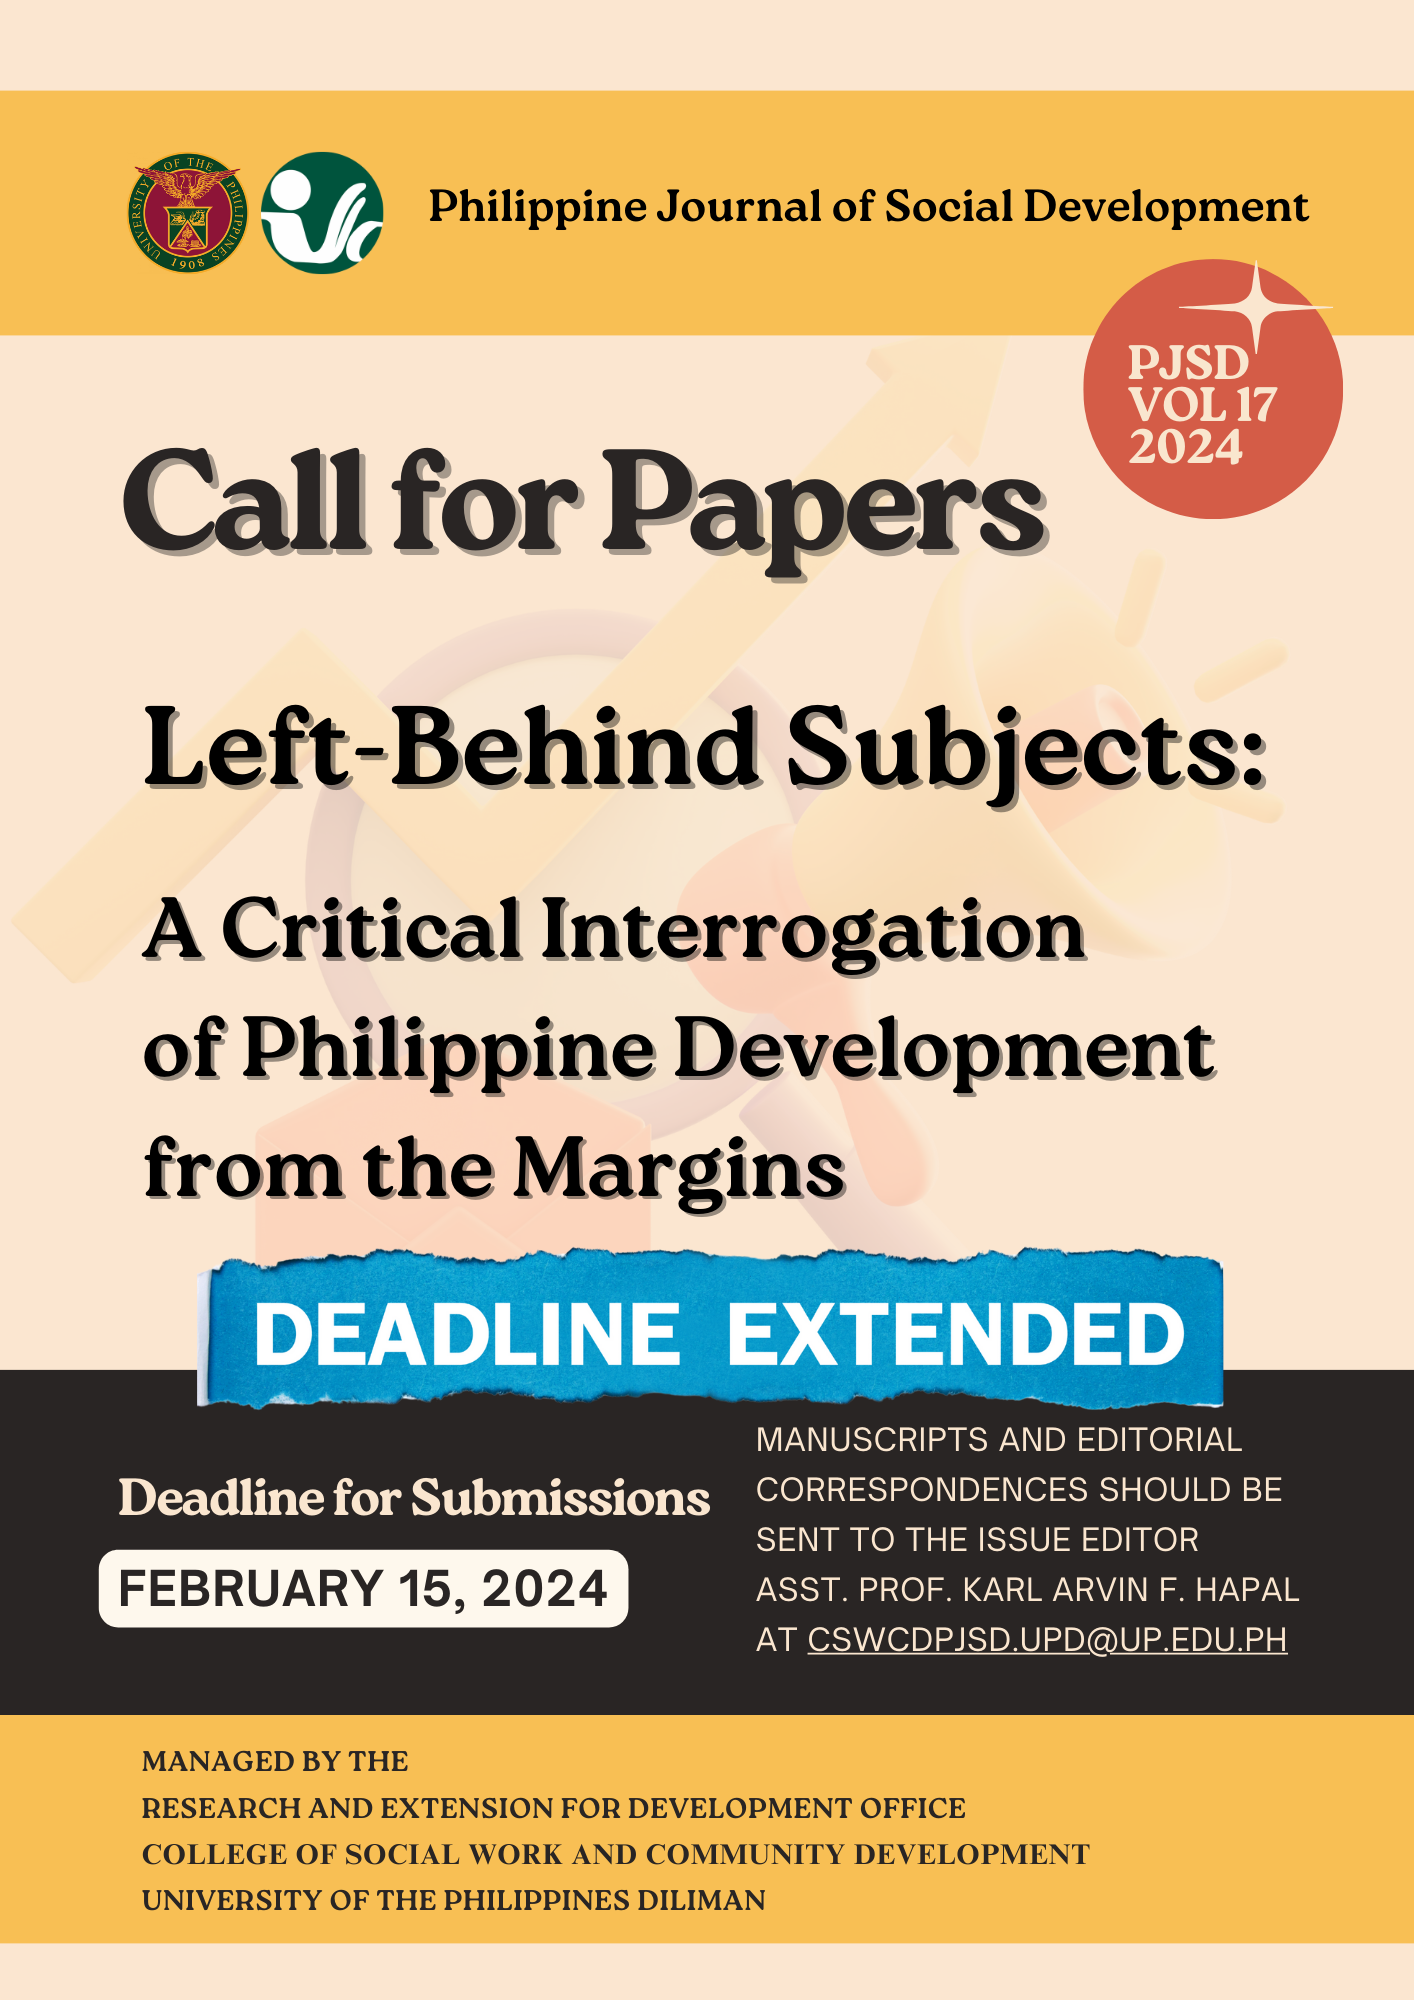 EXTENDED Call for Papers: Philippine Journal of Social Development 2024 Vol 17 Left-Behind Subjects: A Critical Interrogation of Philippine Development from the Margins